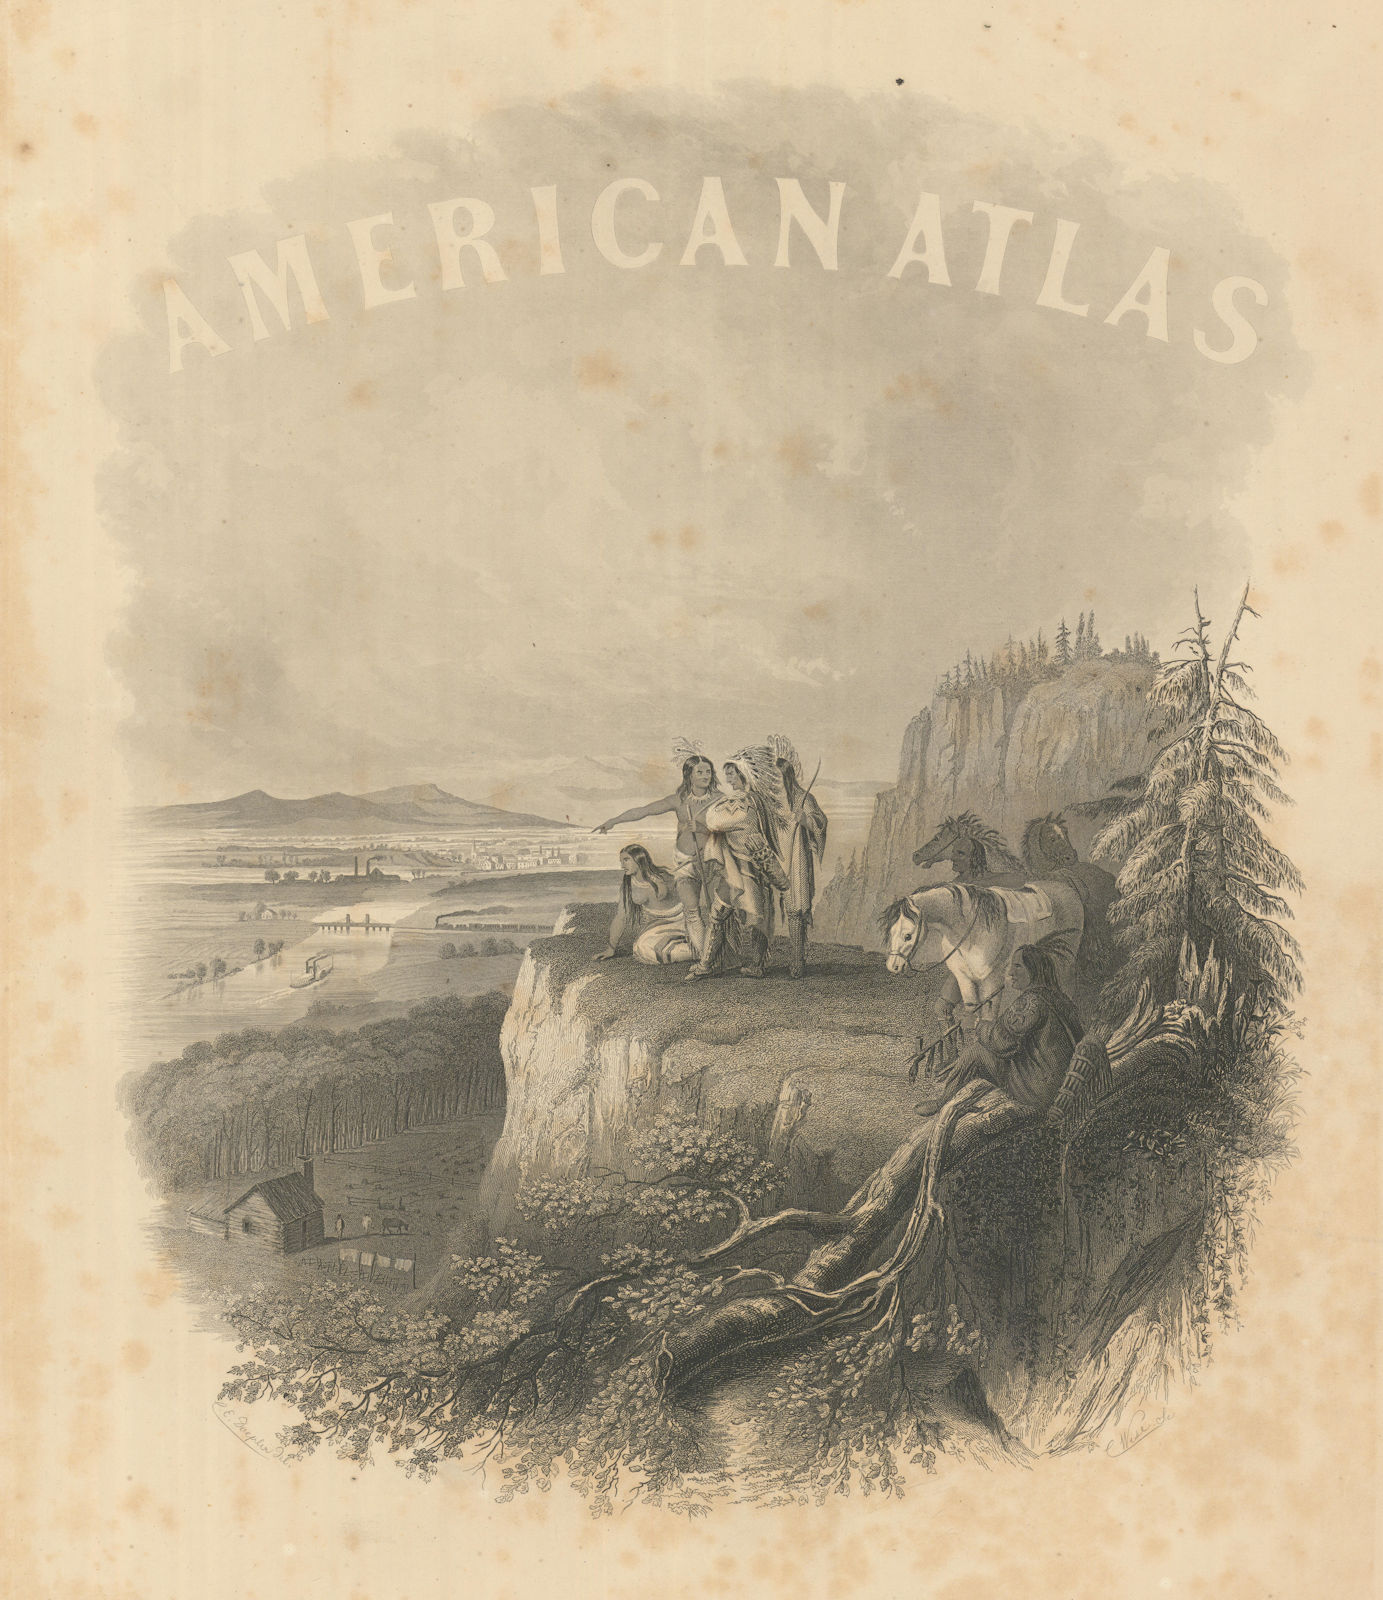 Associate Product Johnson's Family Atlas title page. "American Atlas" 1866 old antique print